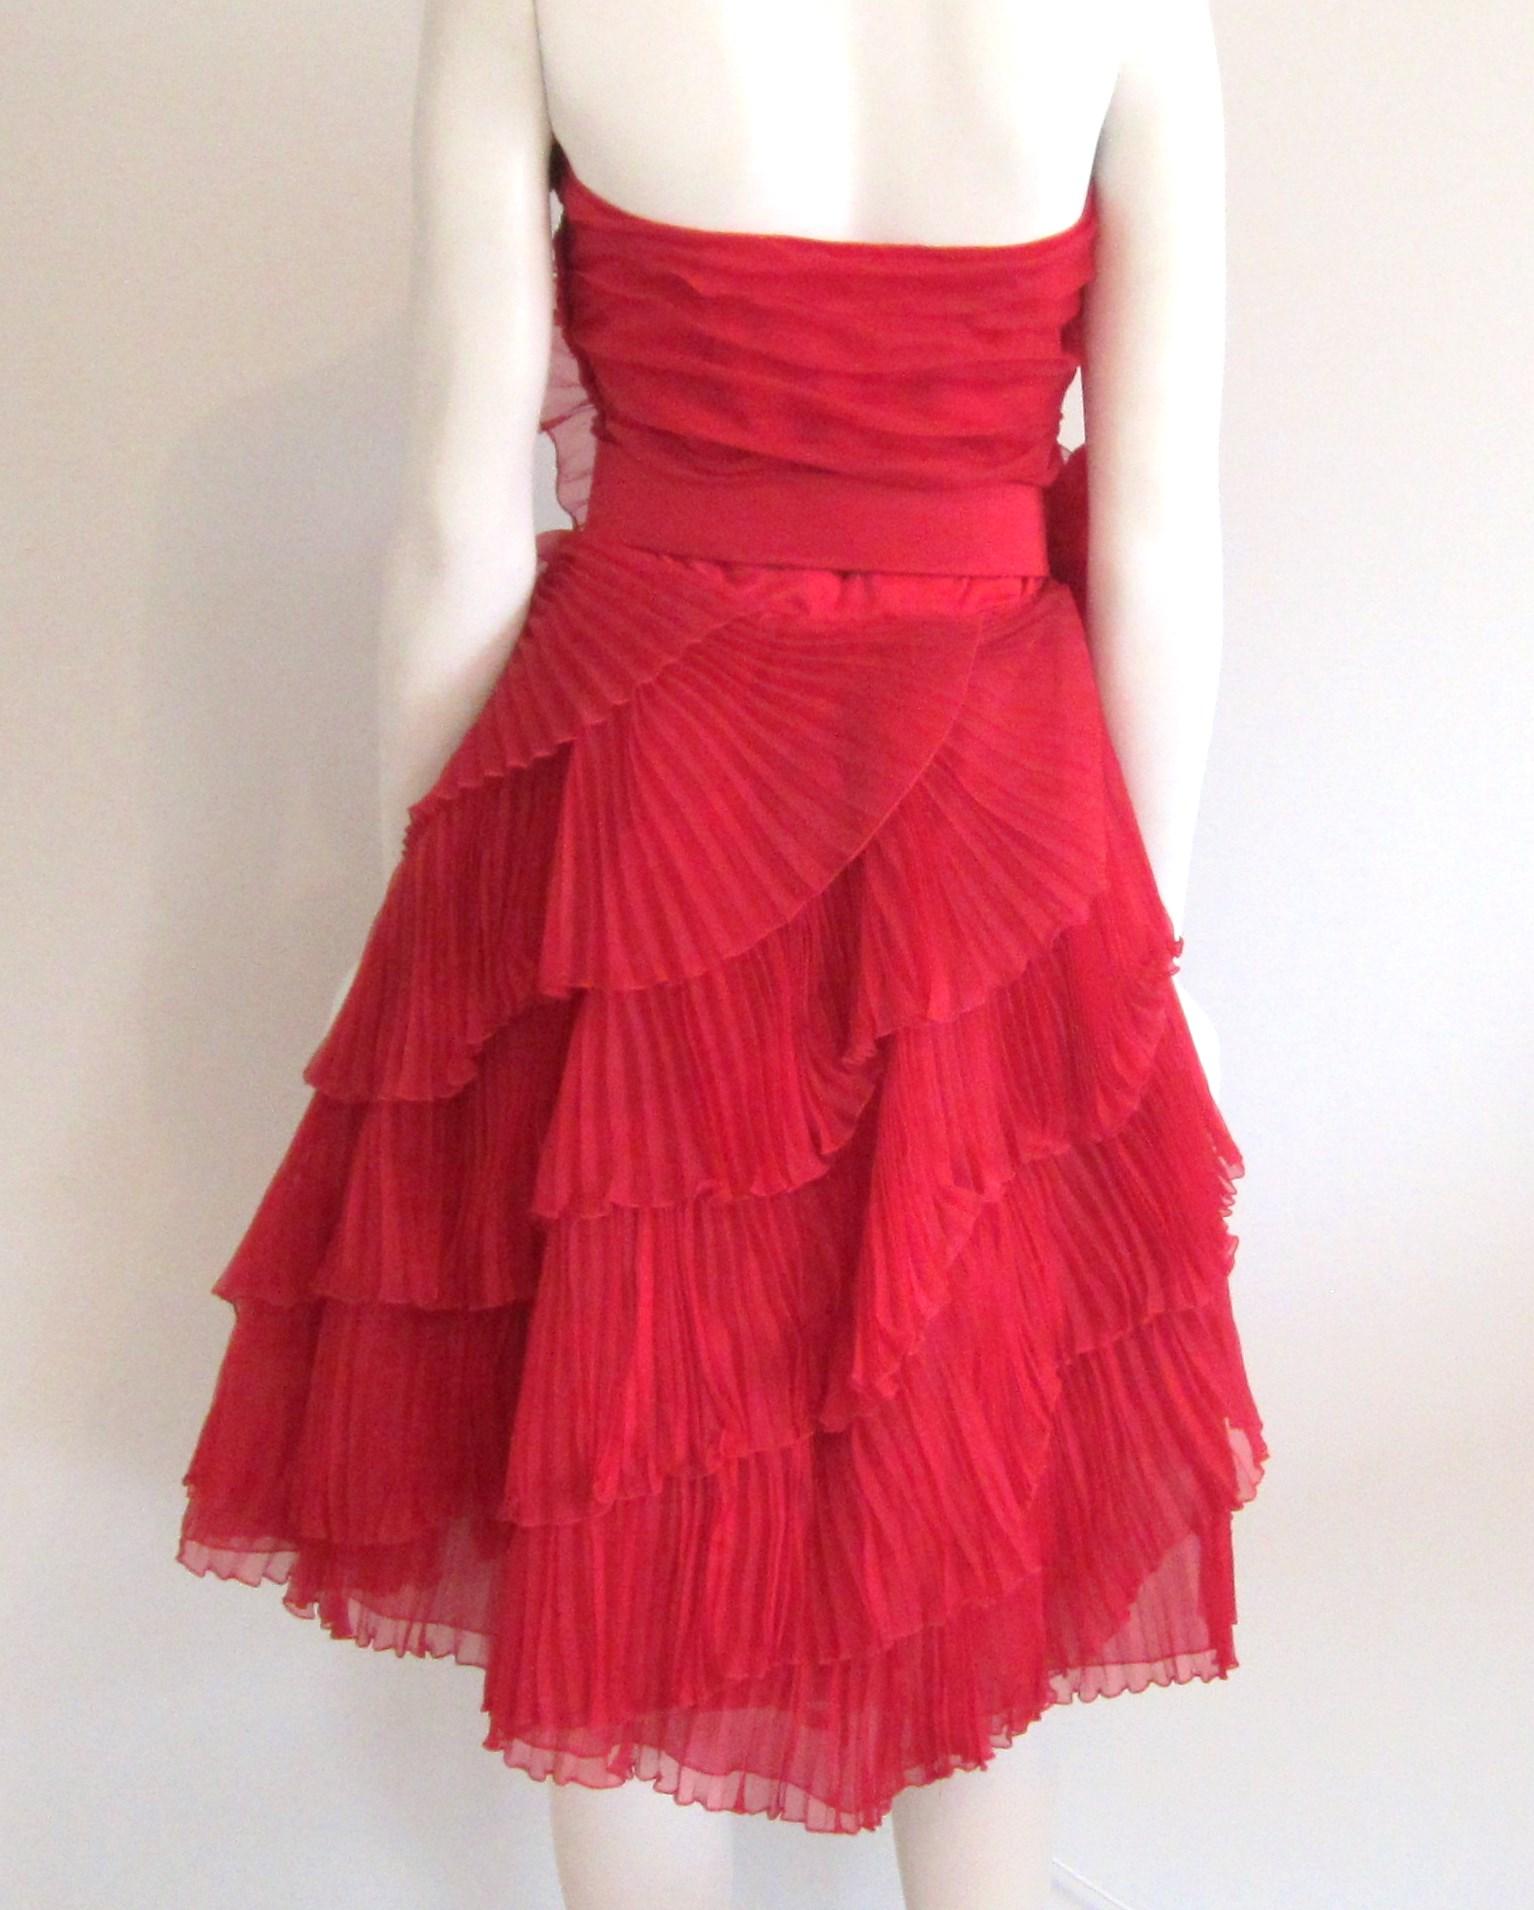 Women's Red Accordion Pleated 1950s Strapless Dress VLV Vintage 